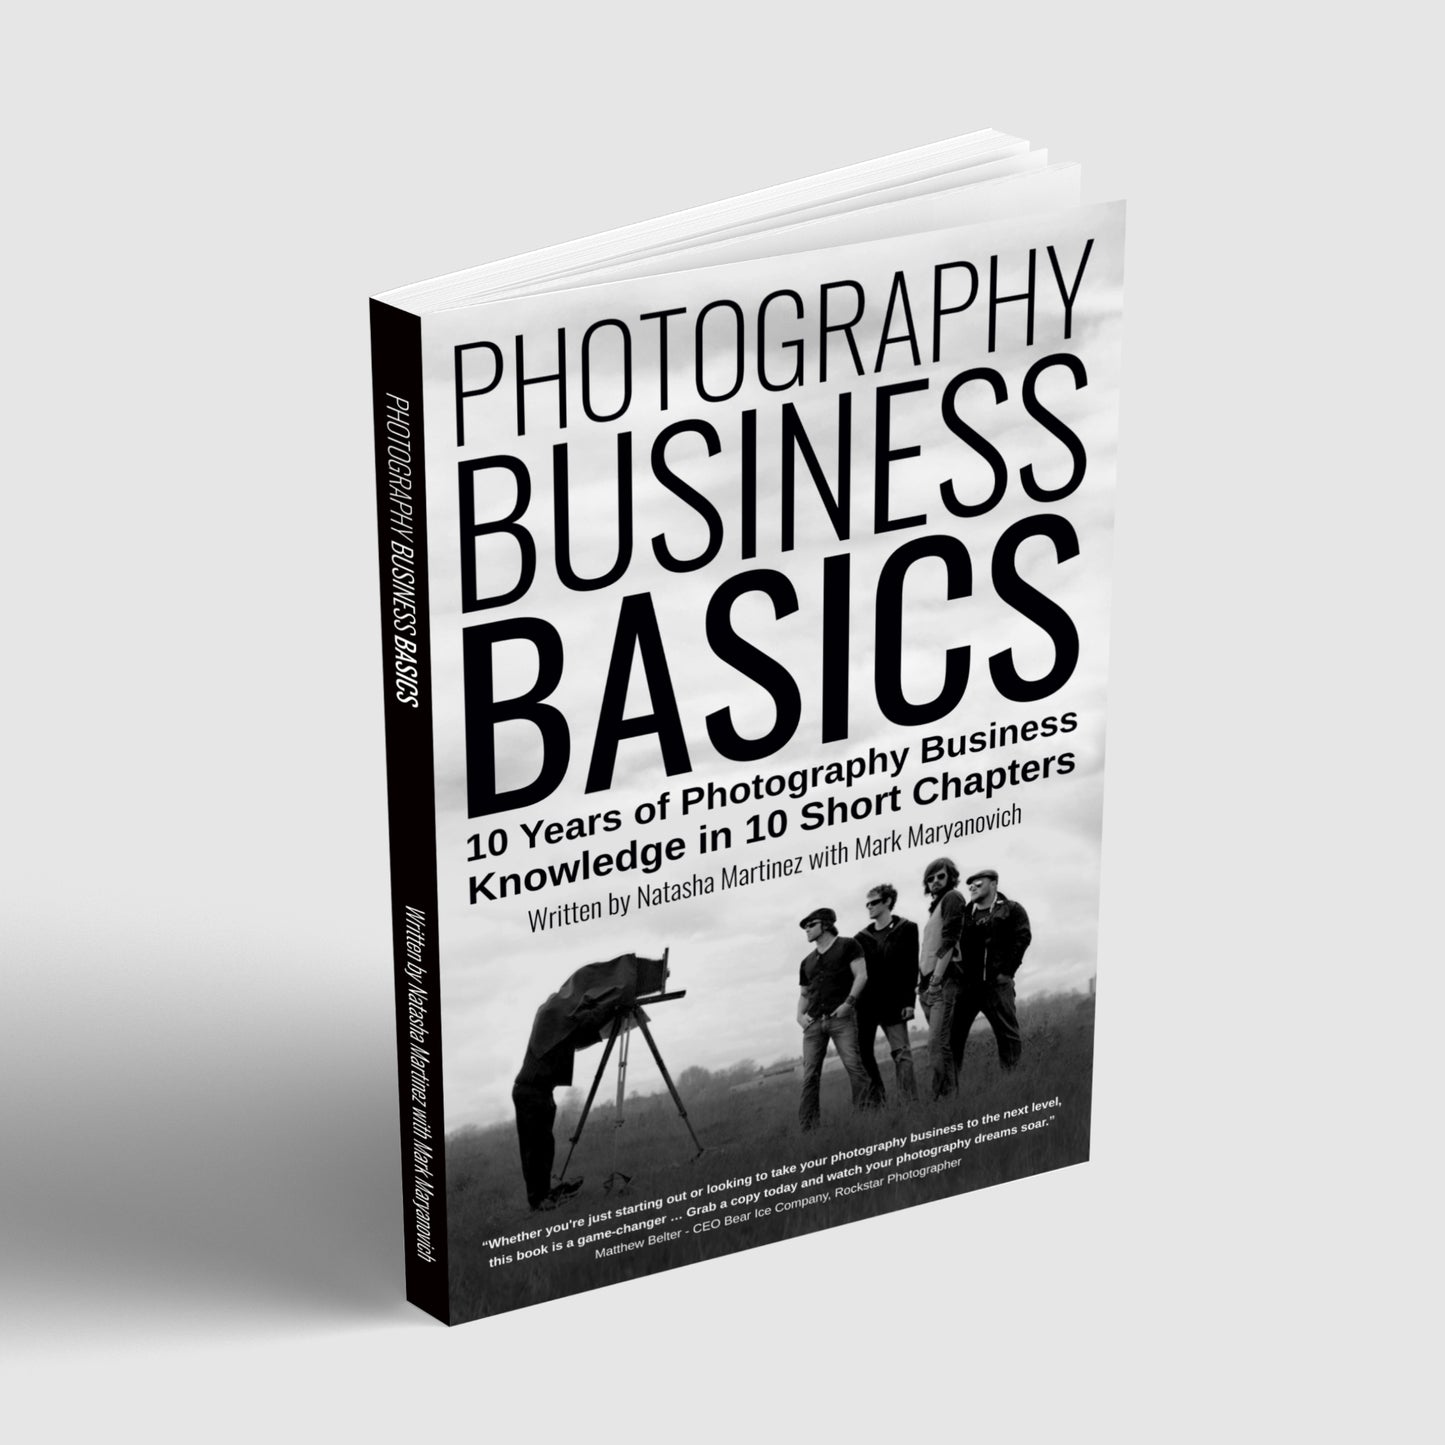 The Book: Photography Business Basics: 10 Years of Photography Business Knowledge in 10 Short Chapters